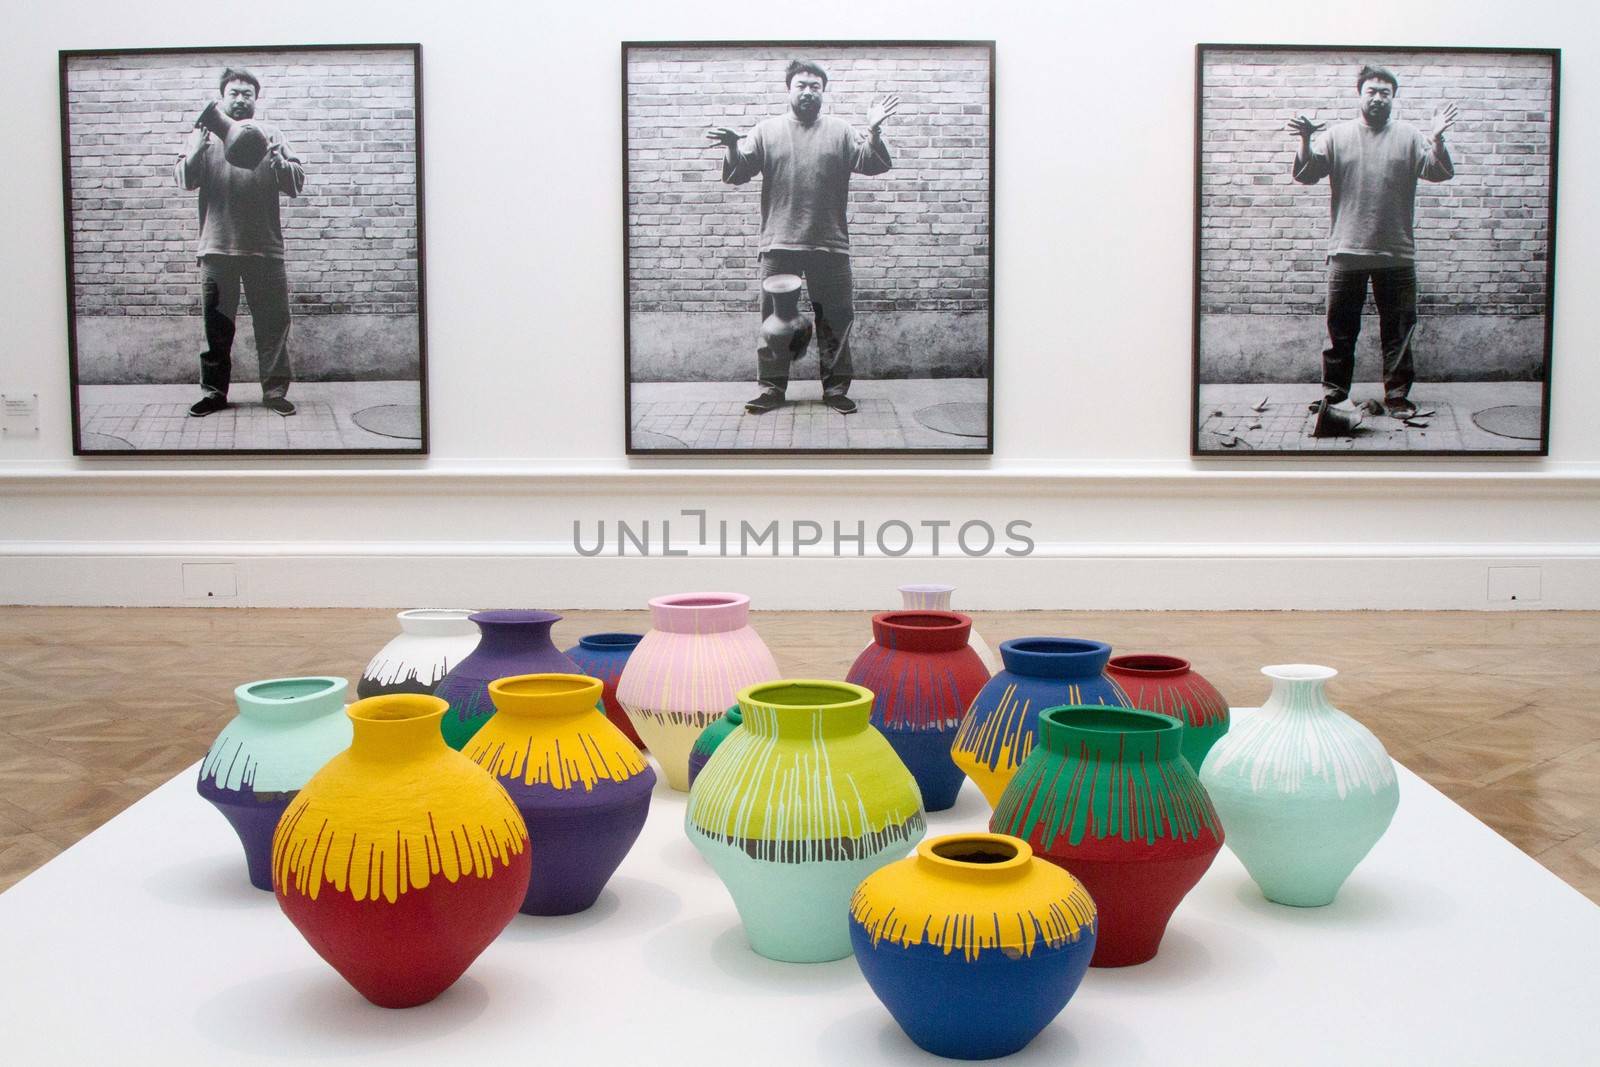 UK, London: Painted vases by Chinese artist Ai Weiwei, in his new exhibition at the Royal Academy in London, on September 15, 2015. 	The show opens to the public on September 19 and has been hailed by critics as his best ever exhbition. Works include a six-part diorama called 'Sacred' depicting his arrest, painted vases, and a security camera made from marble.